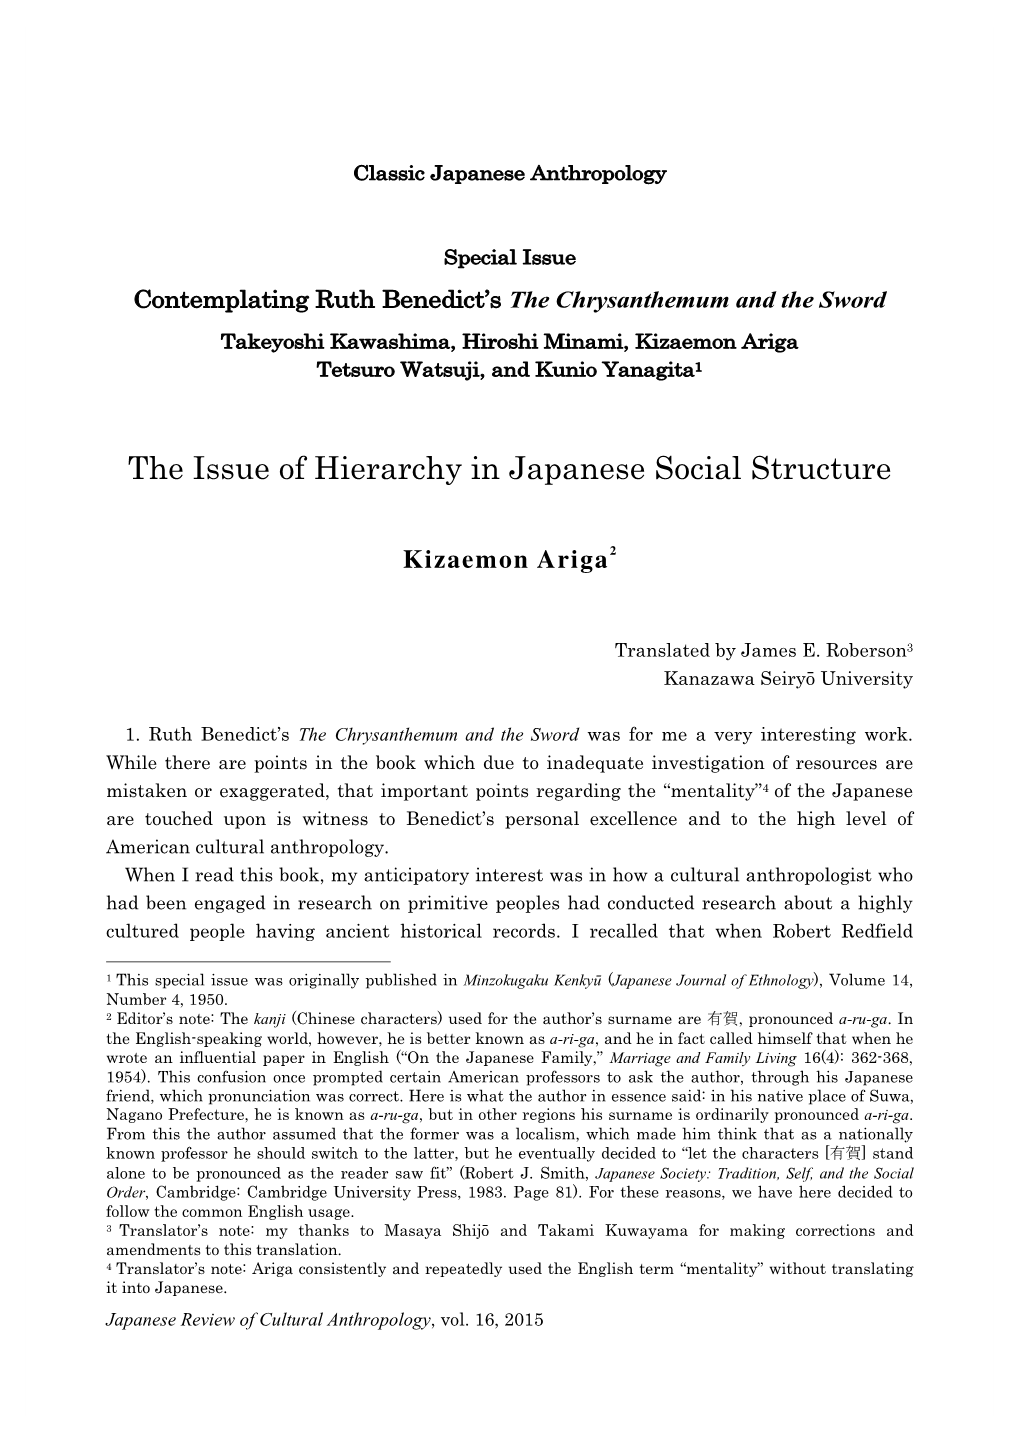 The Issue of Hierarchy in Japanese Social Structure